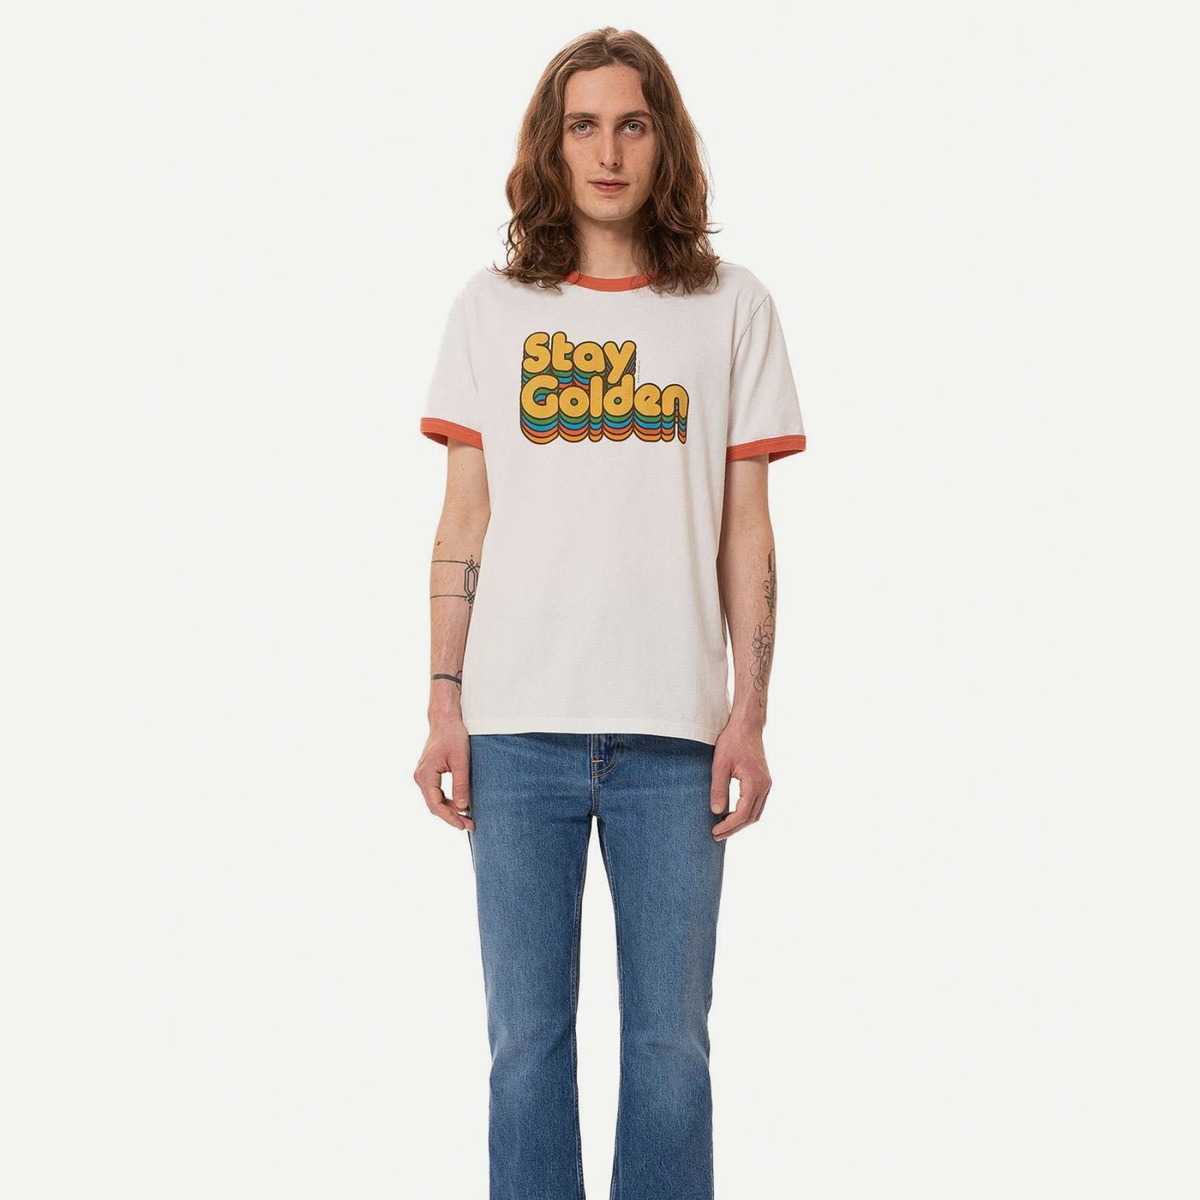 Camiseta Nudie Jeans Ricky Stay Golden